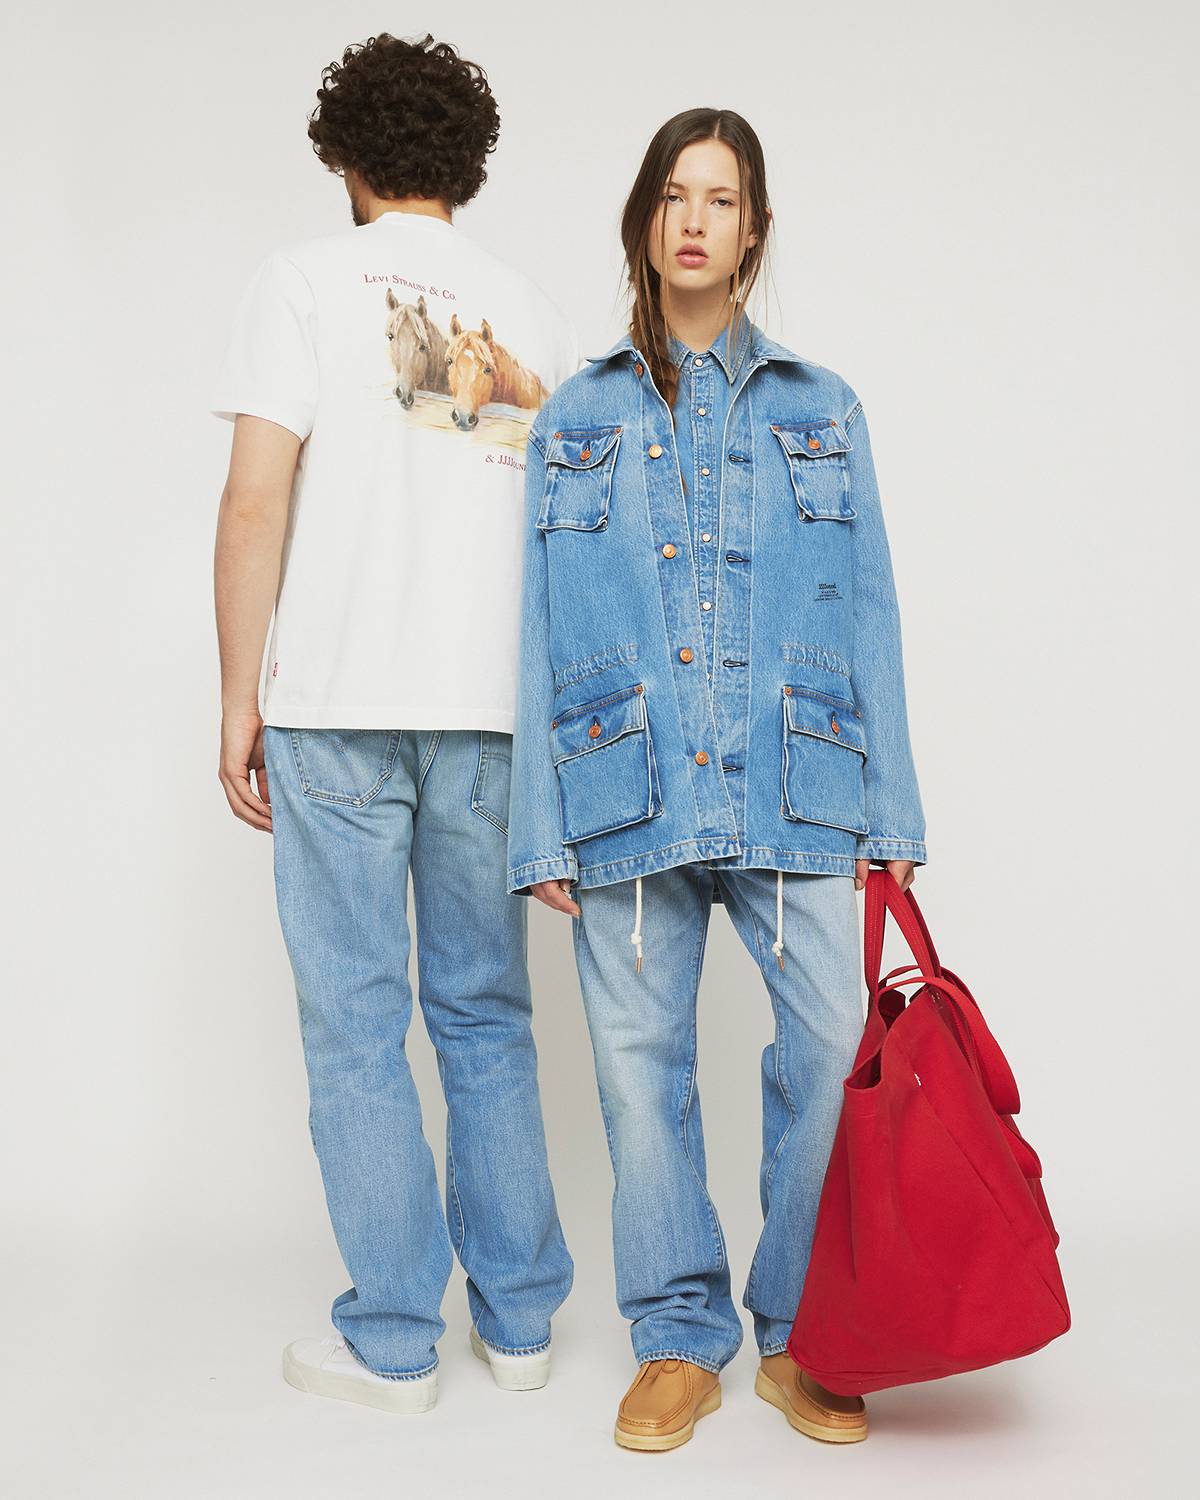 Man on the left wearing a white tee and jeans and woman on the right wearing a trucker jacket and jeans from the Levi's® x JJJJound collaboration.